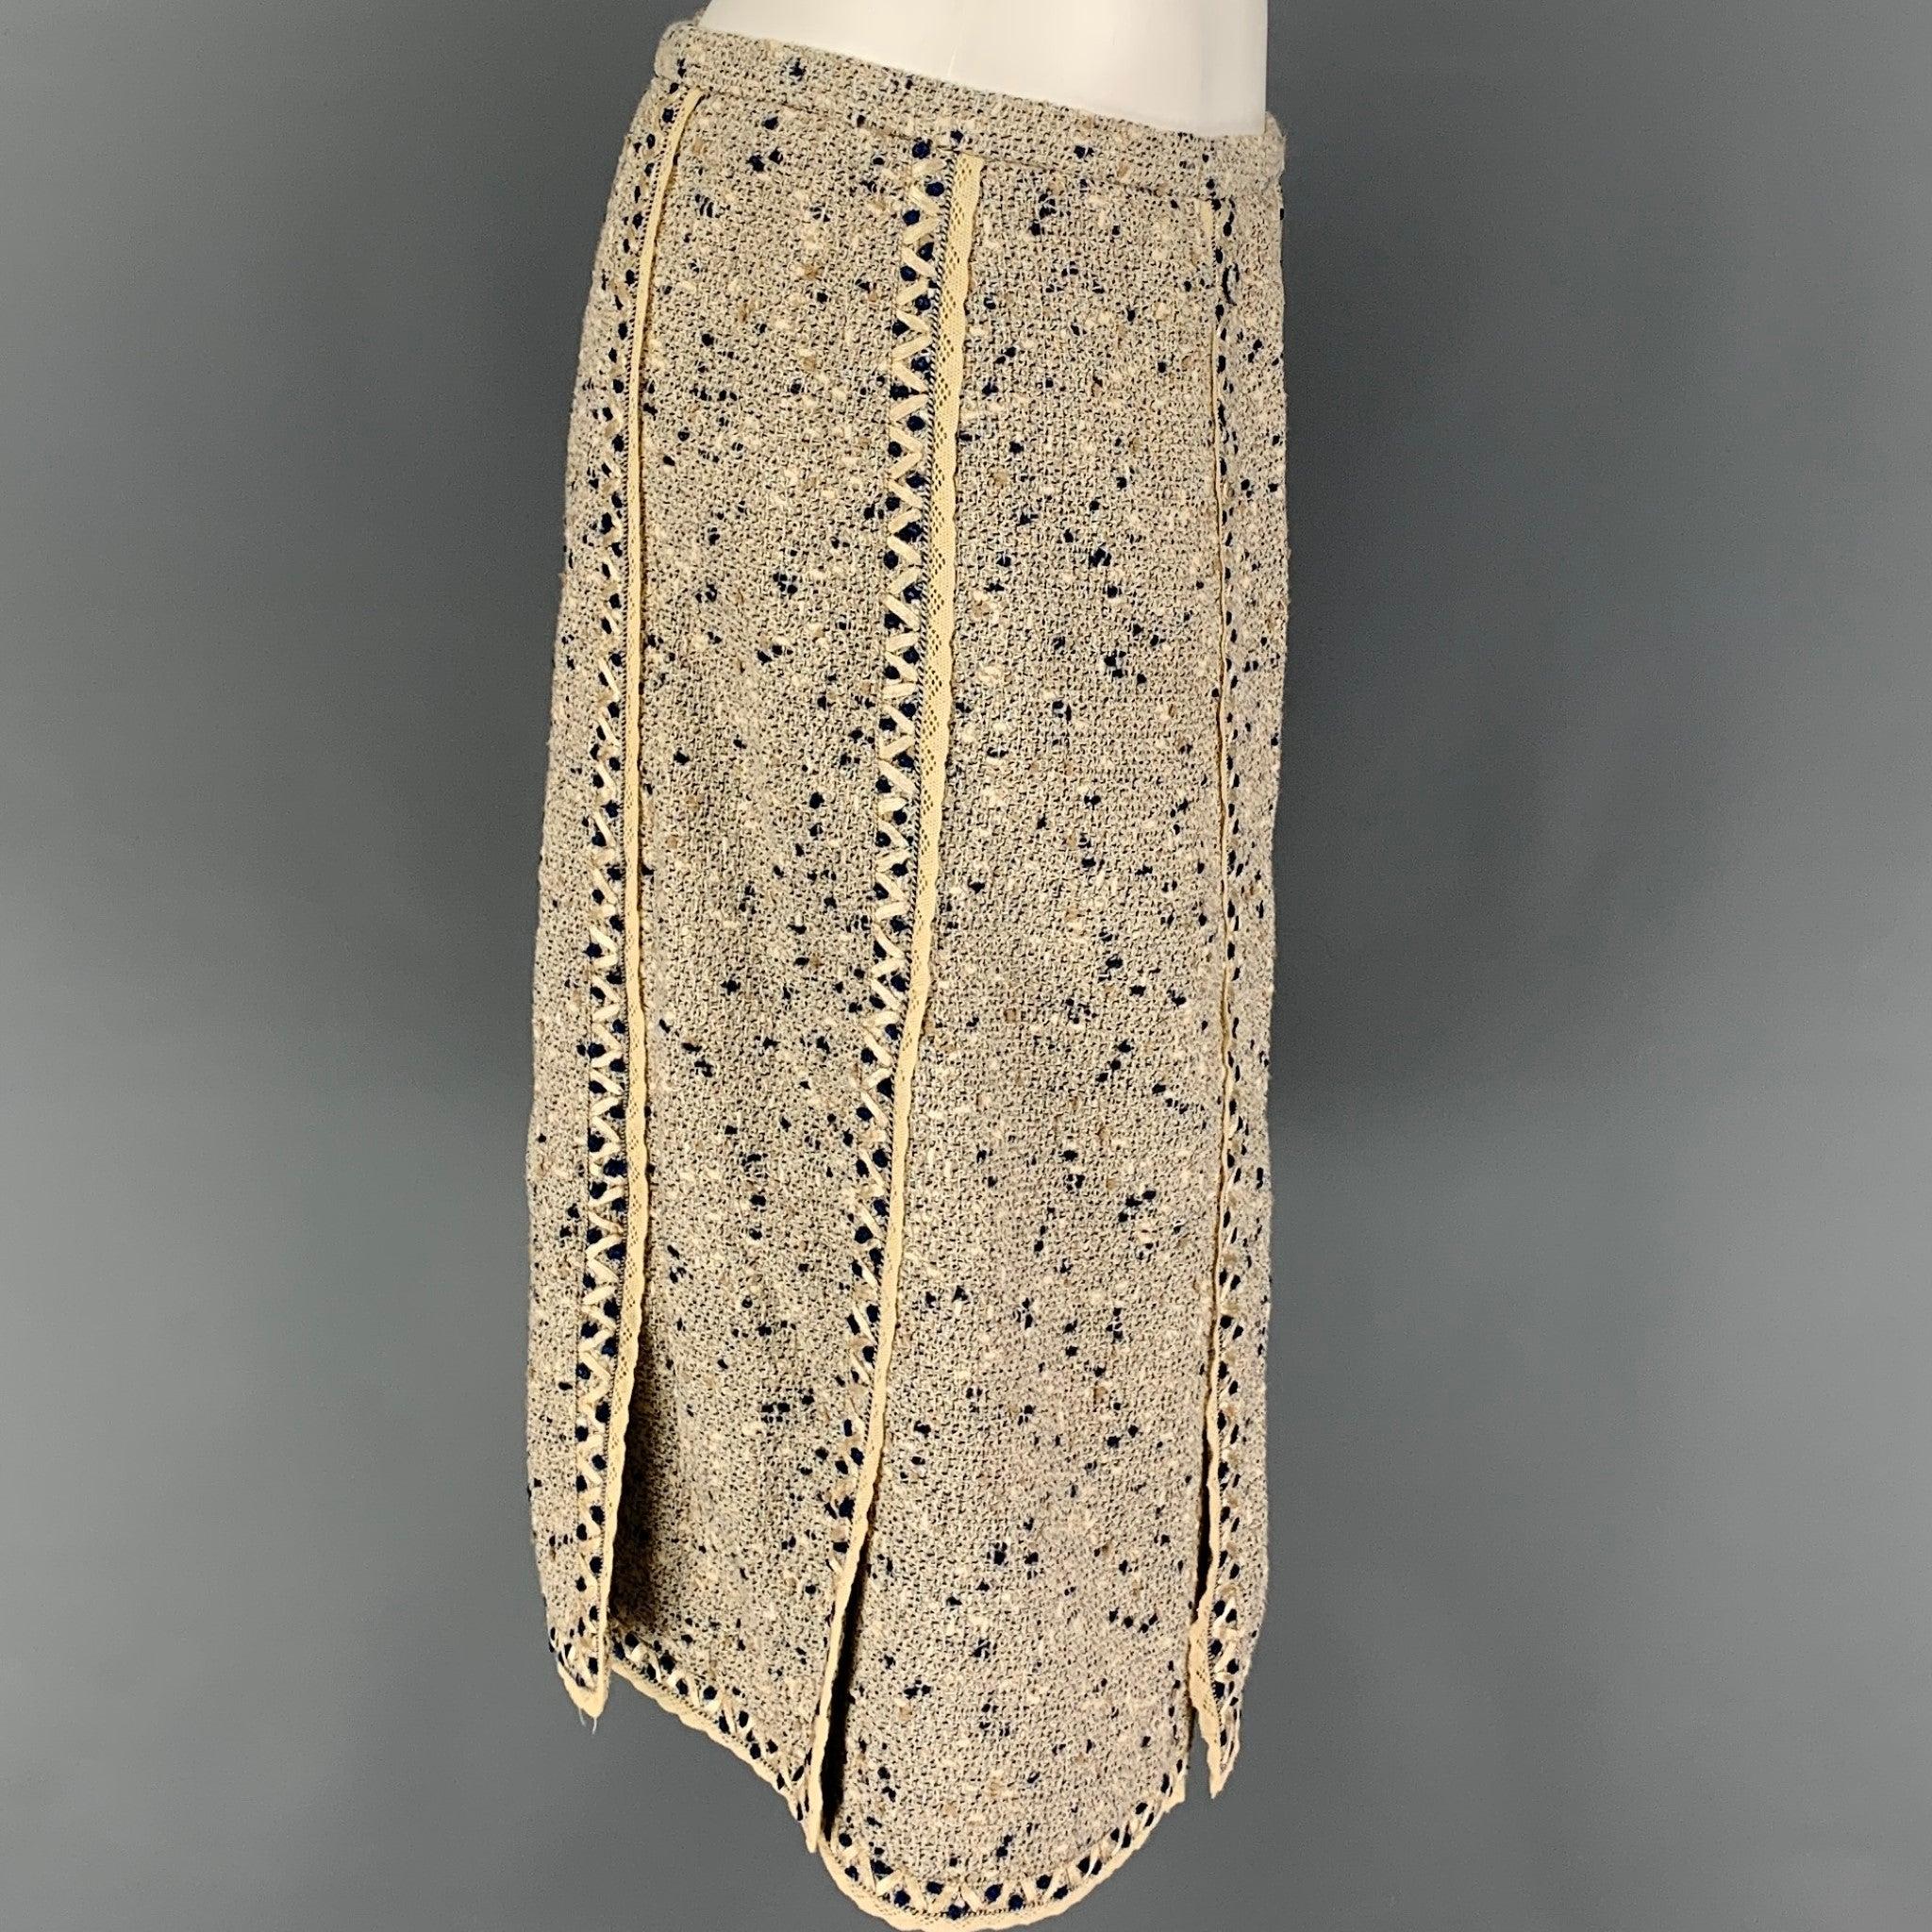 OSCAR DE LA RENTA skirt comes in a beige & blue boucle cotton with a slip liner featuring a tulip style, hook & loop detail, and a zipper closure. Made in Italy.
Very Good
Pre-Owned Condition. 

Marked:   12 

Measurements: 
  Waist: 31 inches 